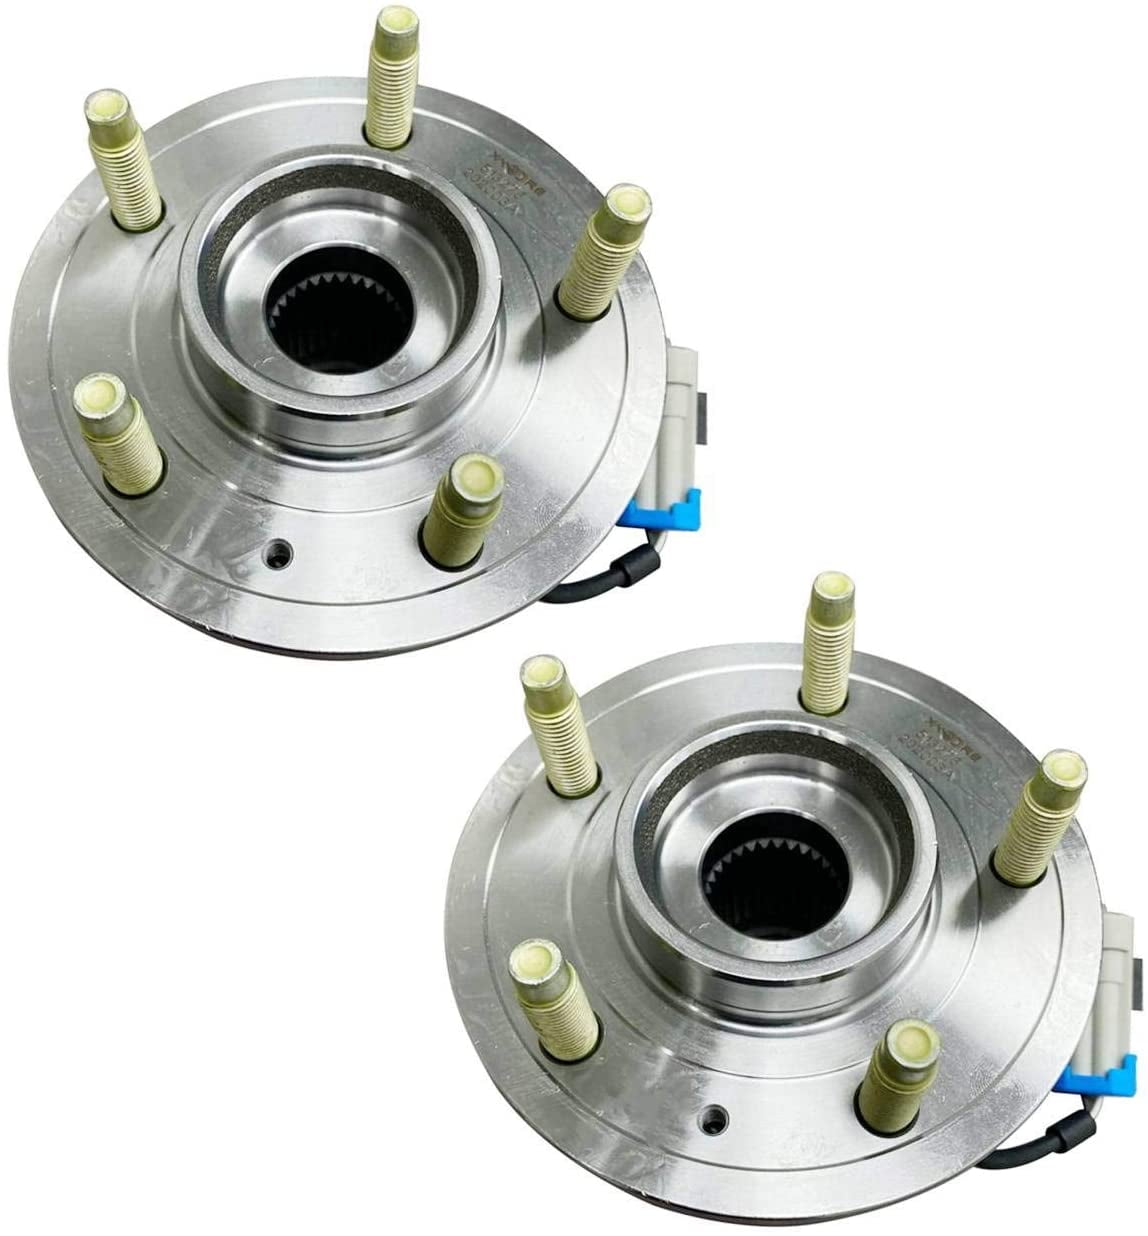 Bapmic 513276 Front Wheel Bearing & Hub Assembly compatible with 2007-2009 Suzuki XL-7 2008-2010 Saturn Vue 2012-2015 Chevrolet Captiva Sport Set of 2 